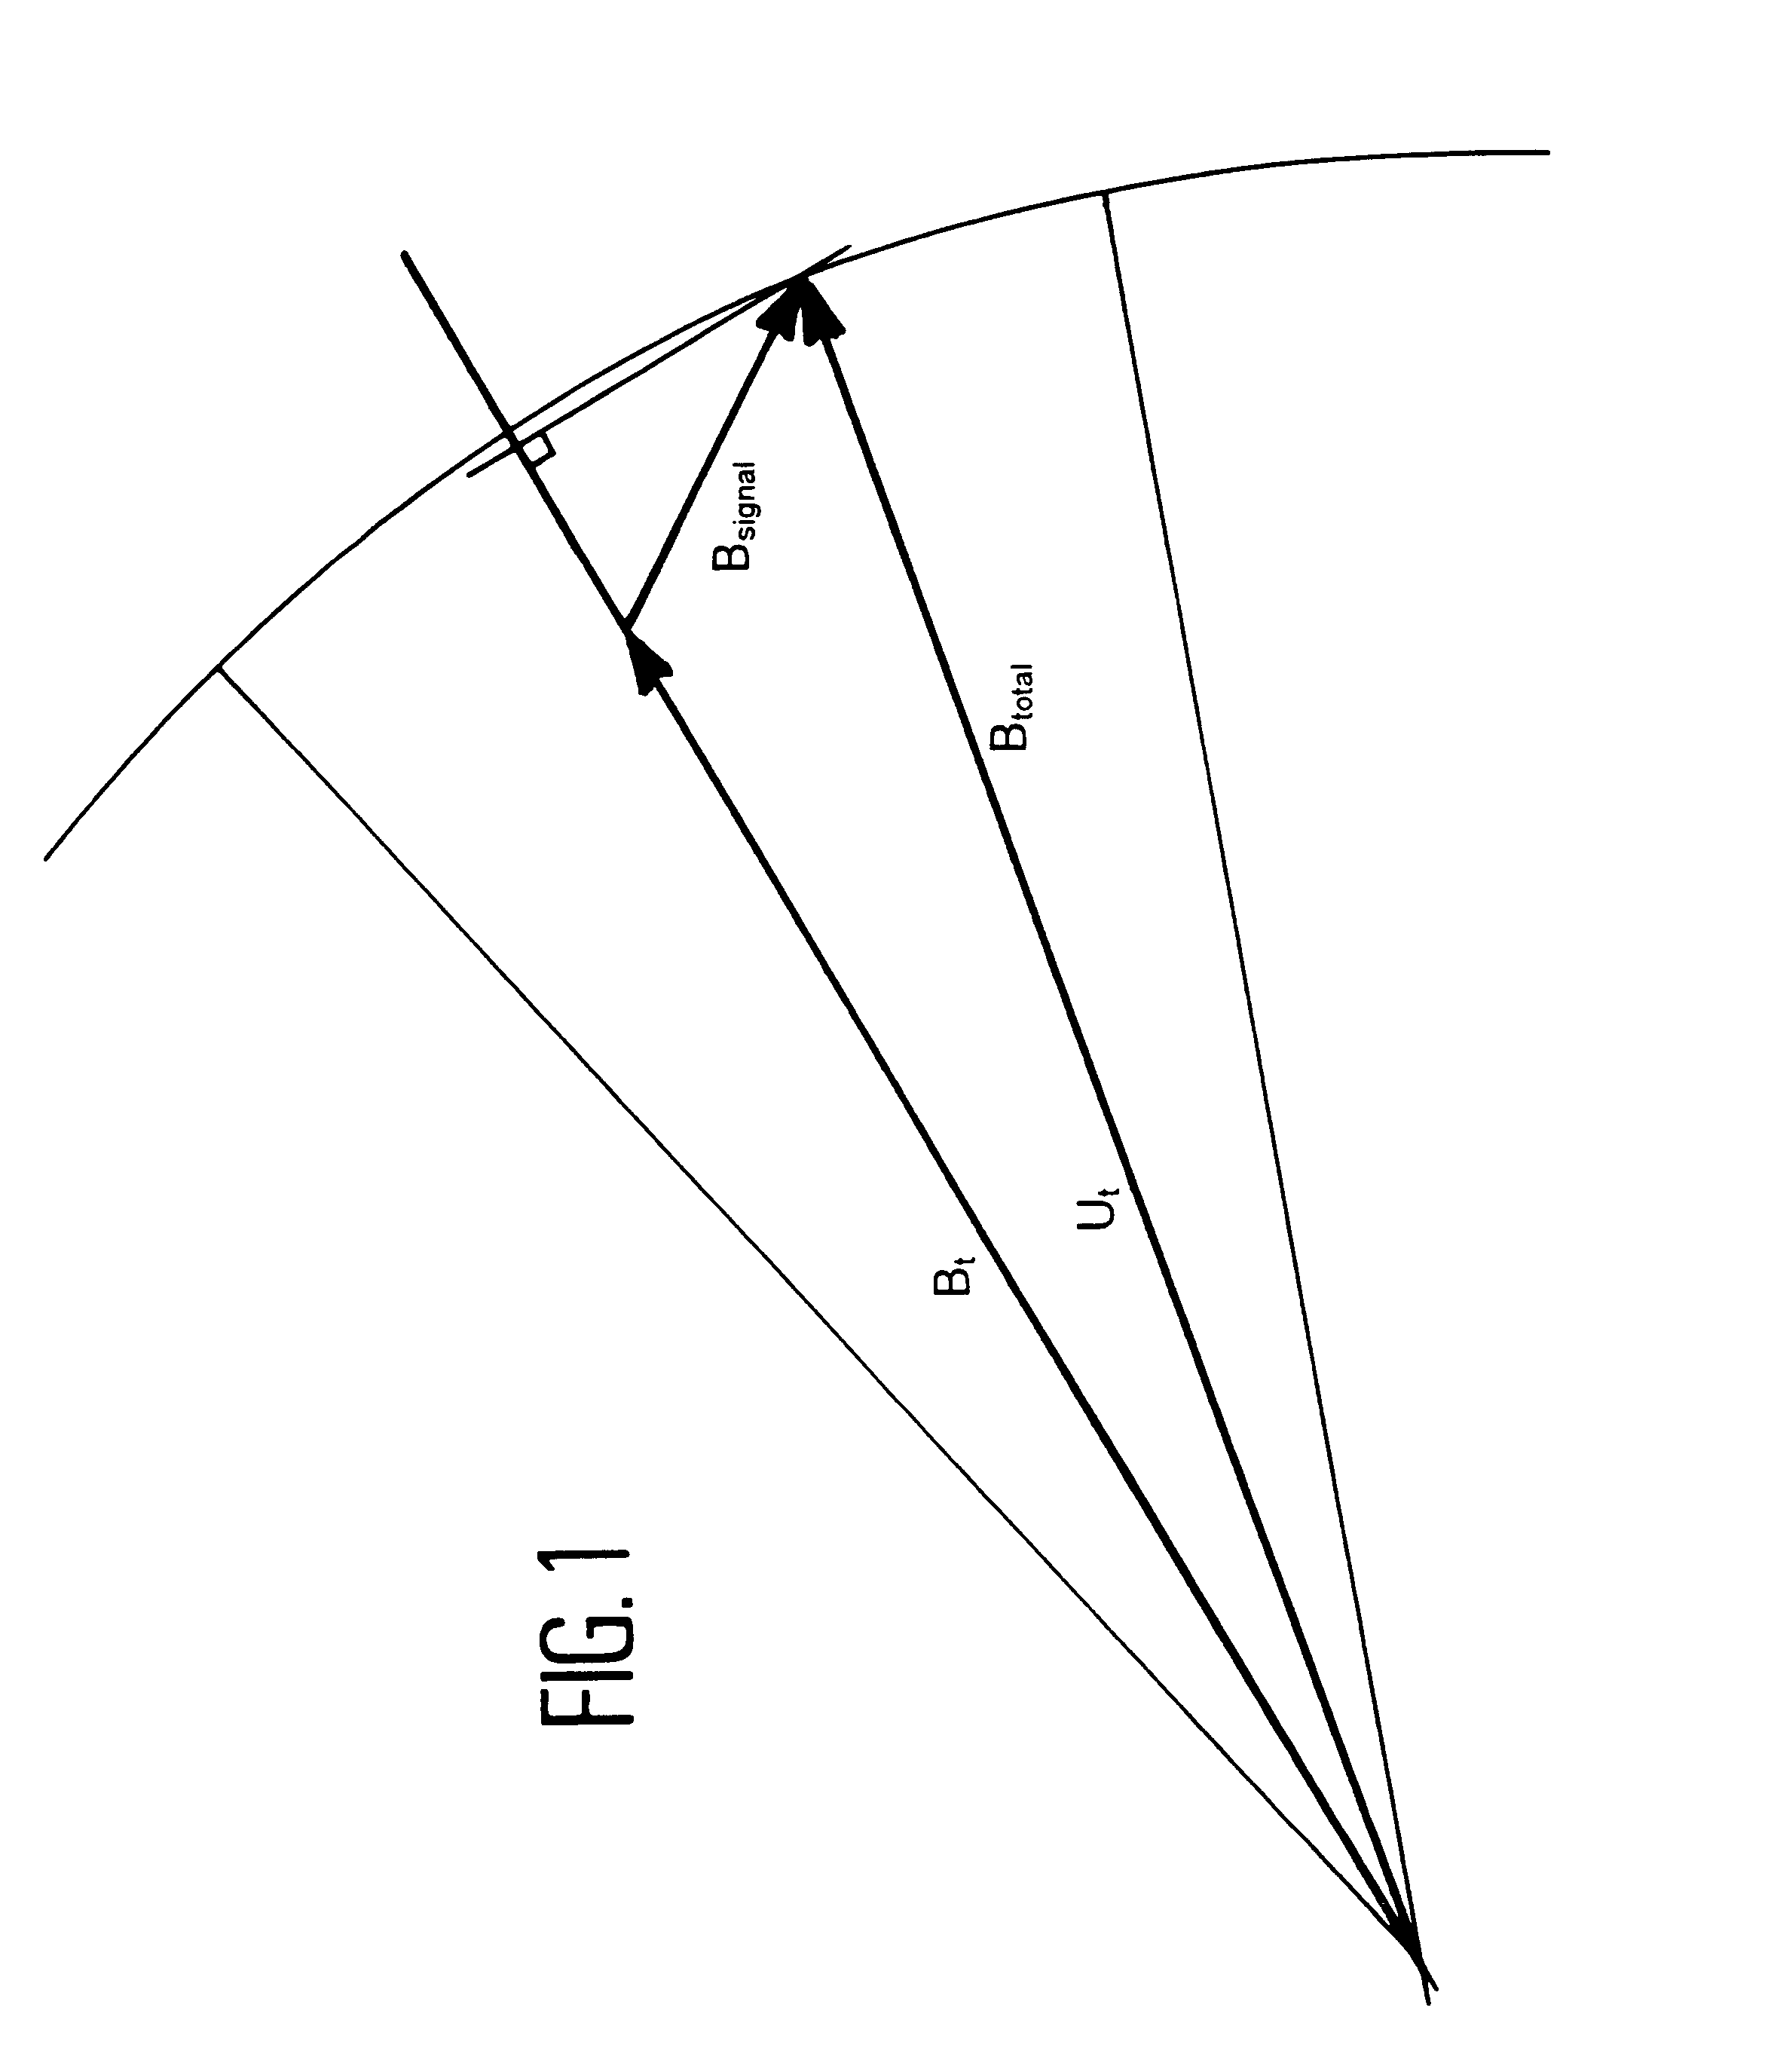 Process for determining the position of a moving object using magnetic gradientmetric measurements